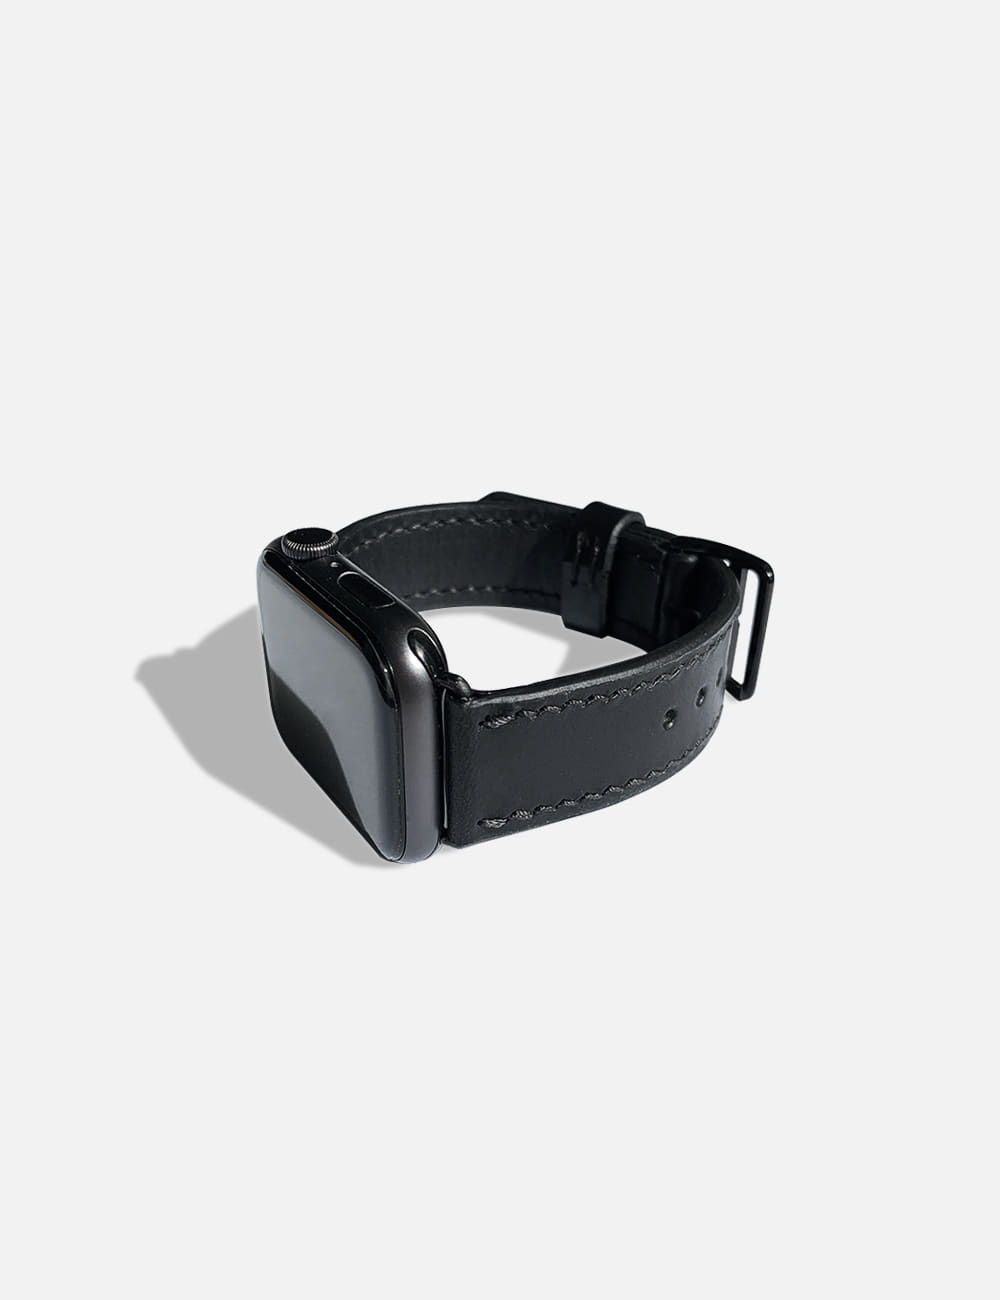 APPLE WATCH LEATHER STRAP